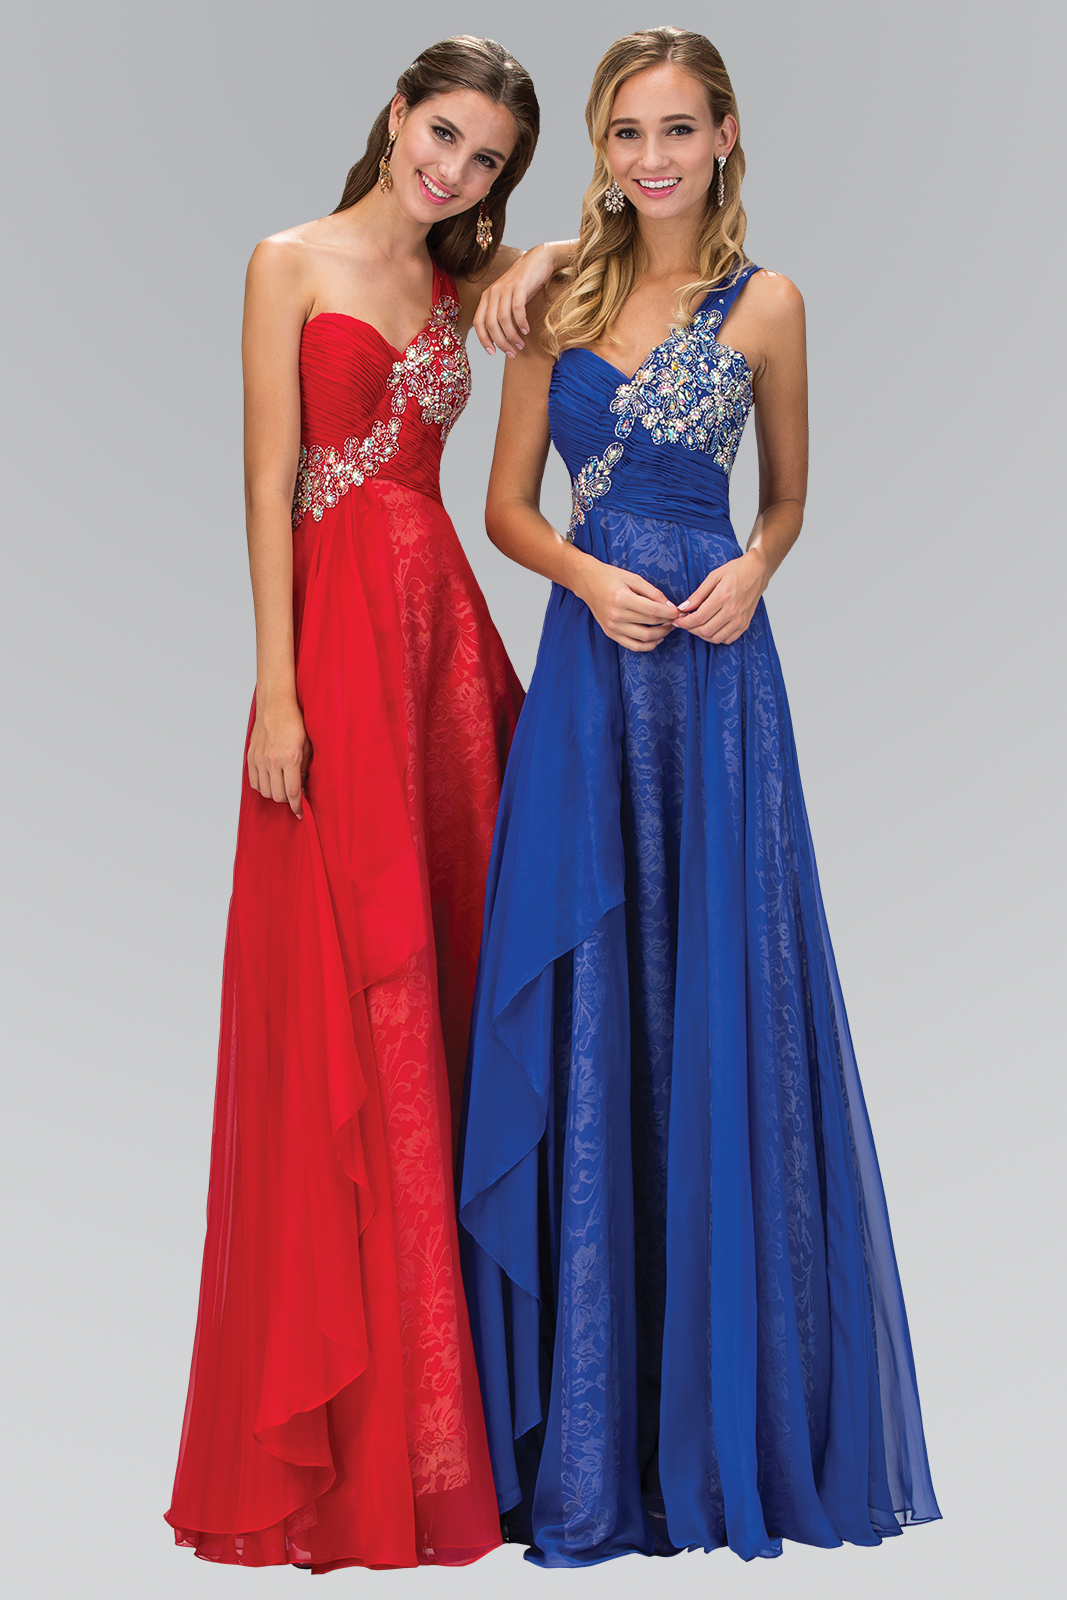 women in red and blue gowns